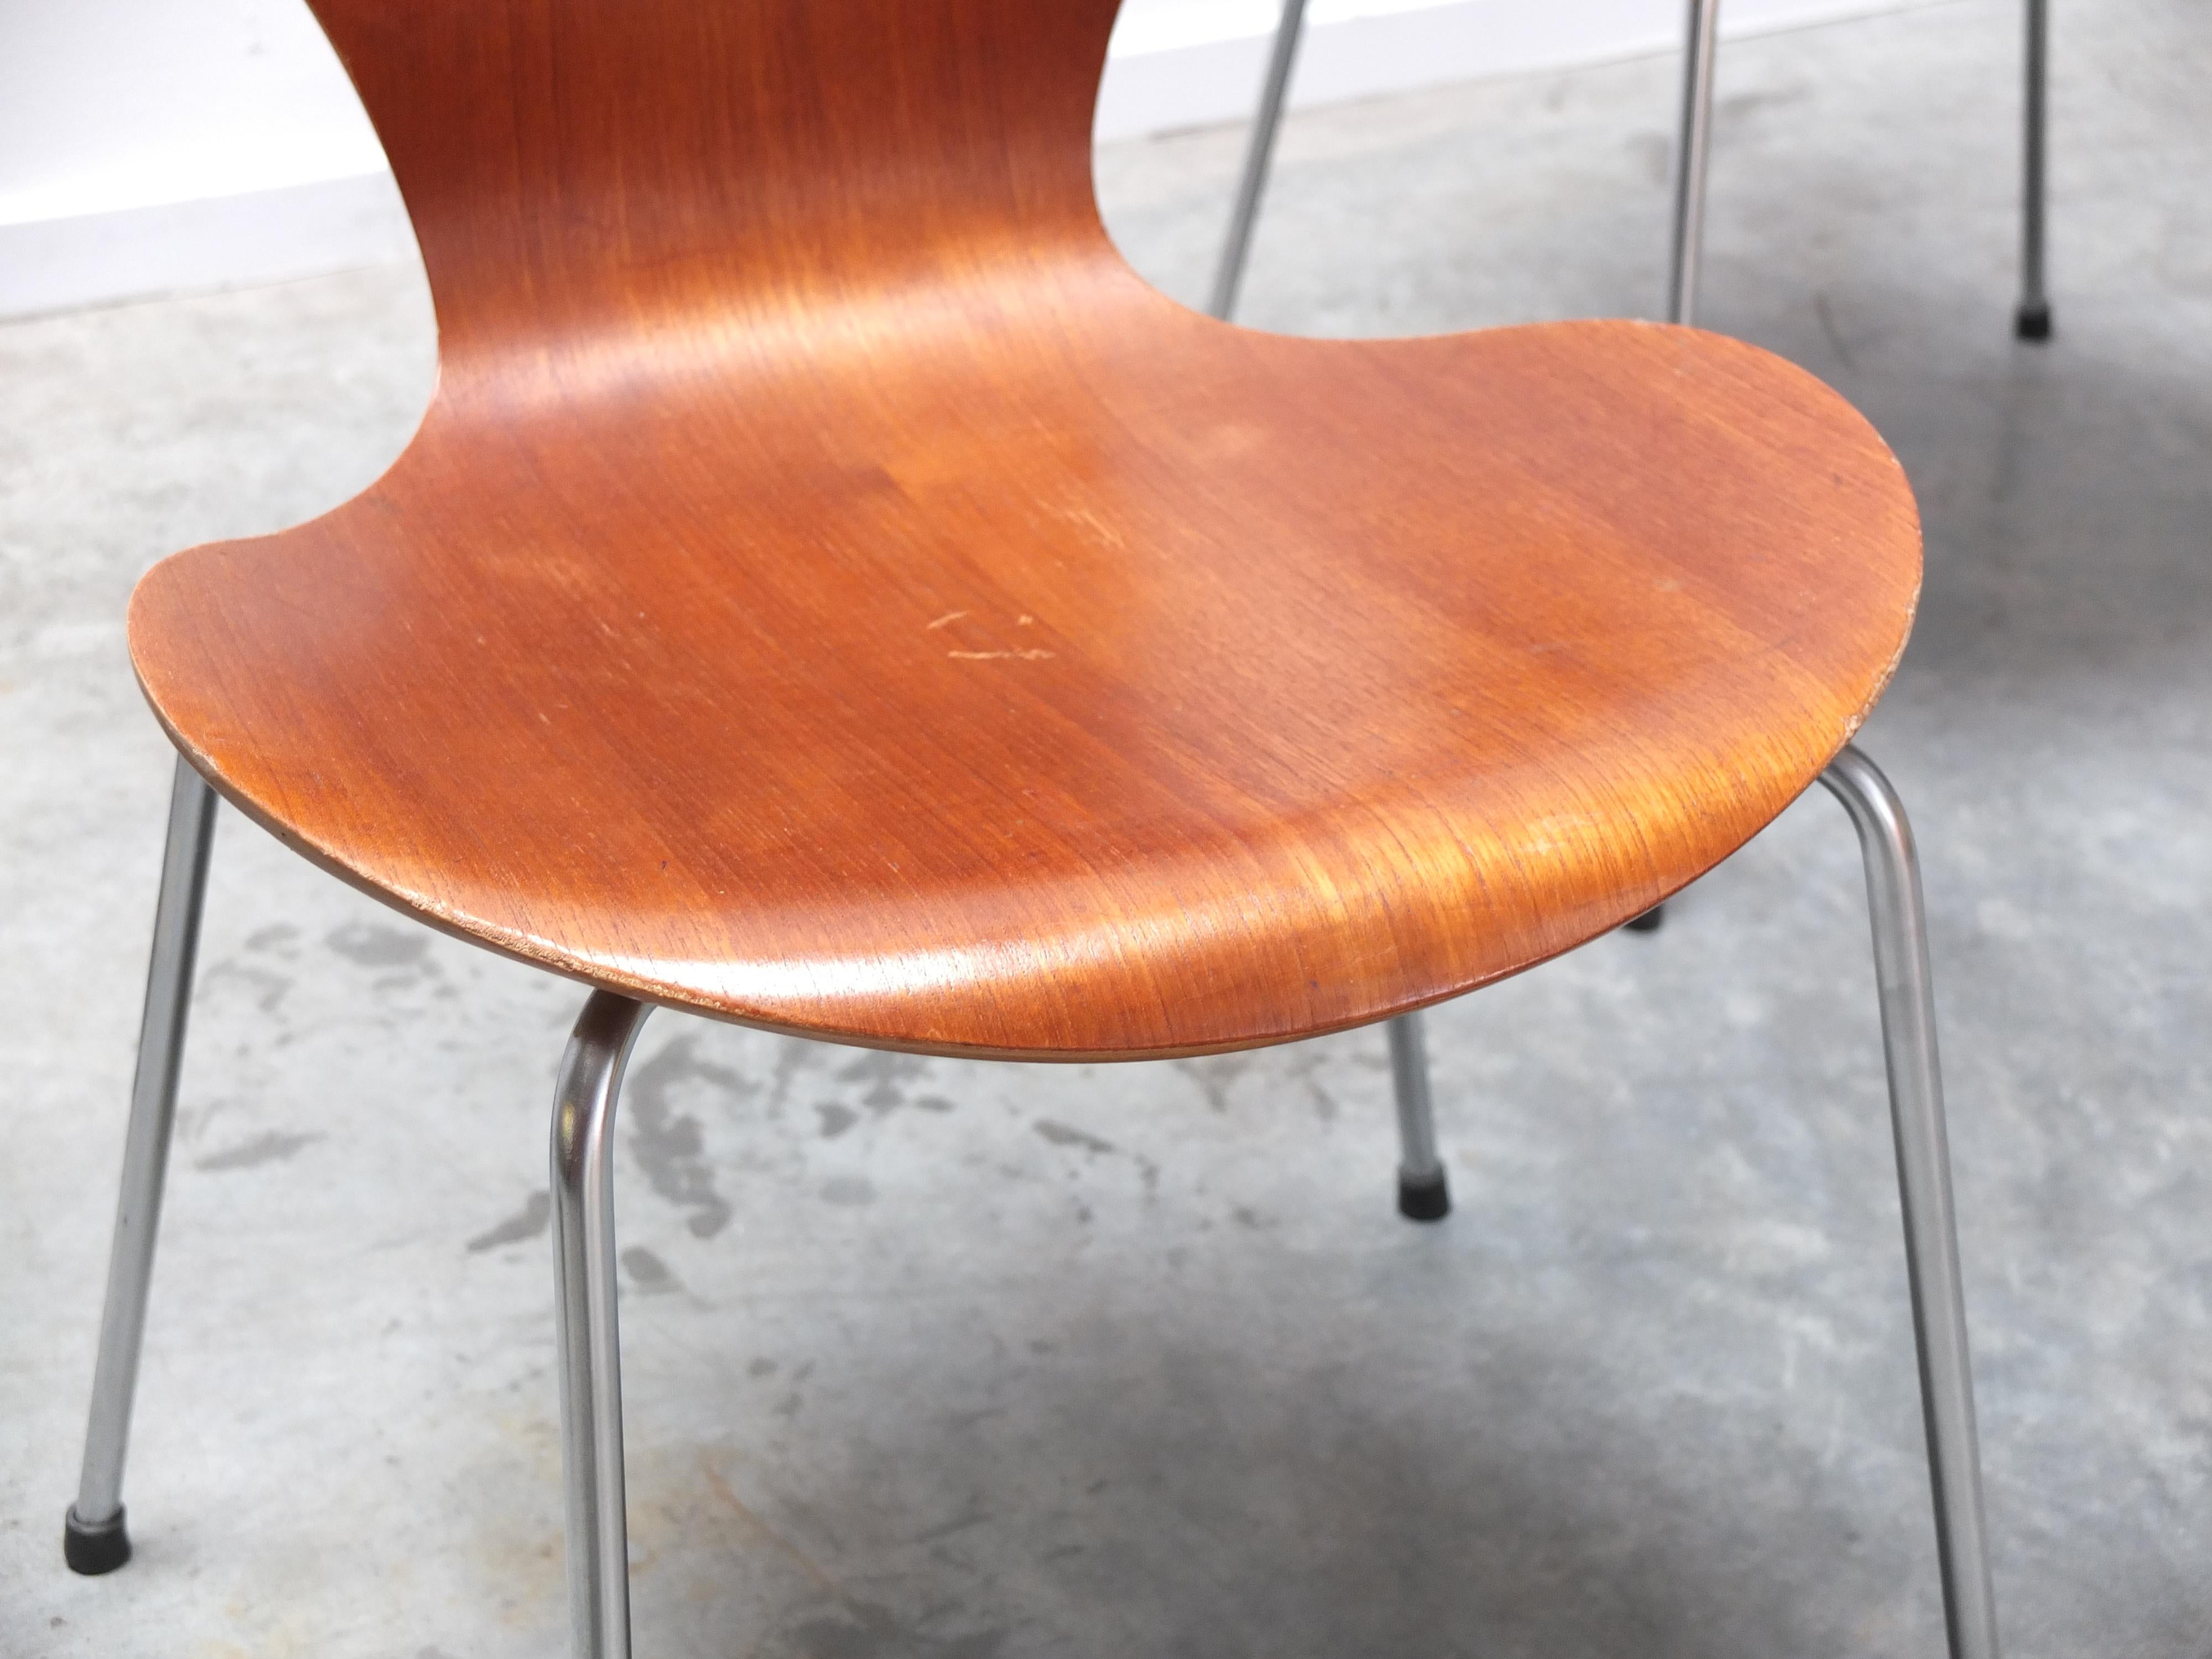 Early Set of 6 Teak 'Series 7' Chairs by Arne Jacobsen for Fritz Hansen, 1955 4